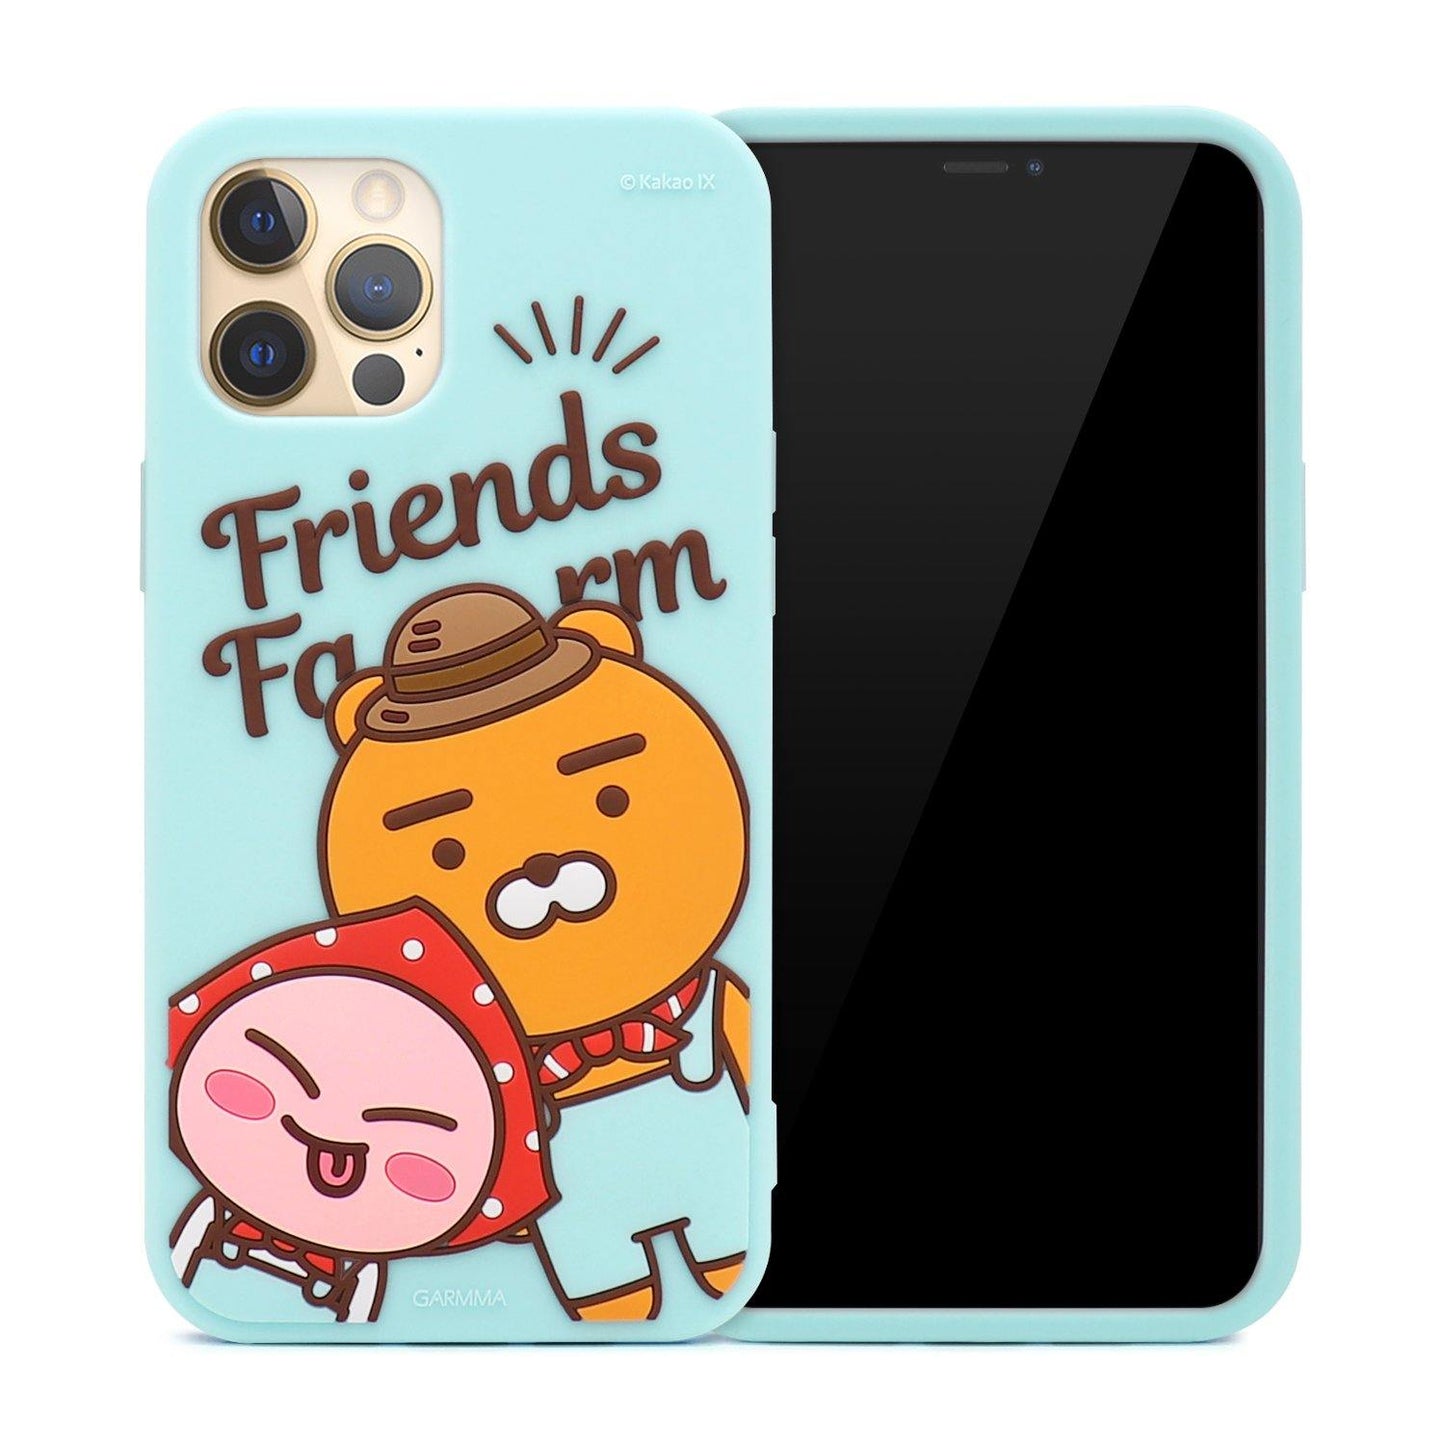 GARMMA Kakao Friends Farm Shockproof 3D Silicone Back Case Cover - Armor King Case